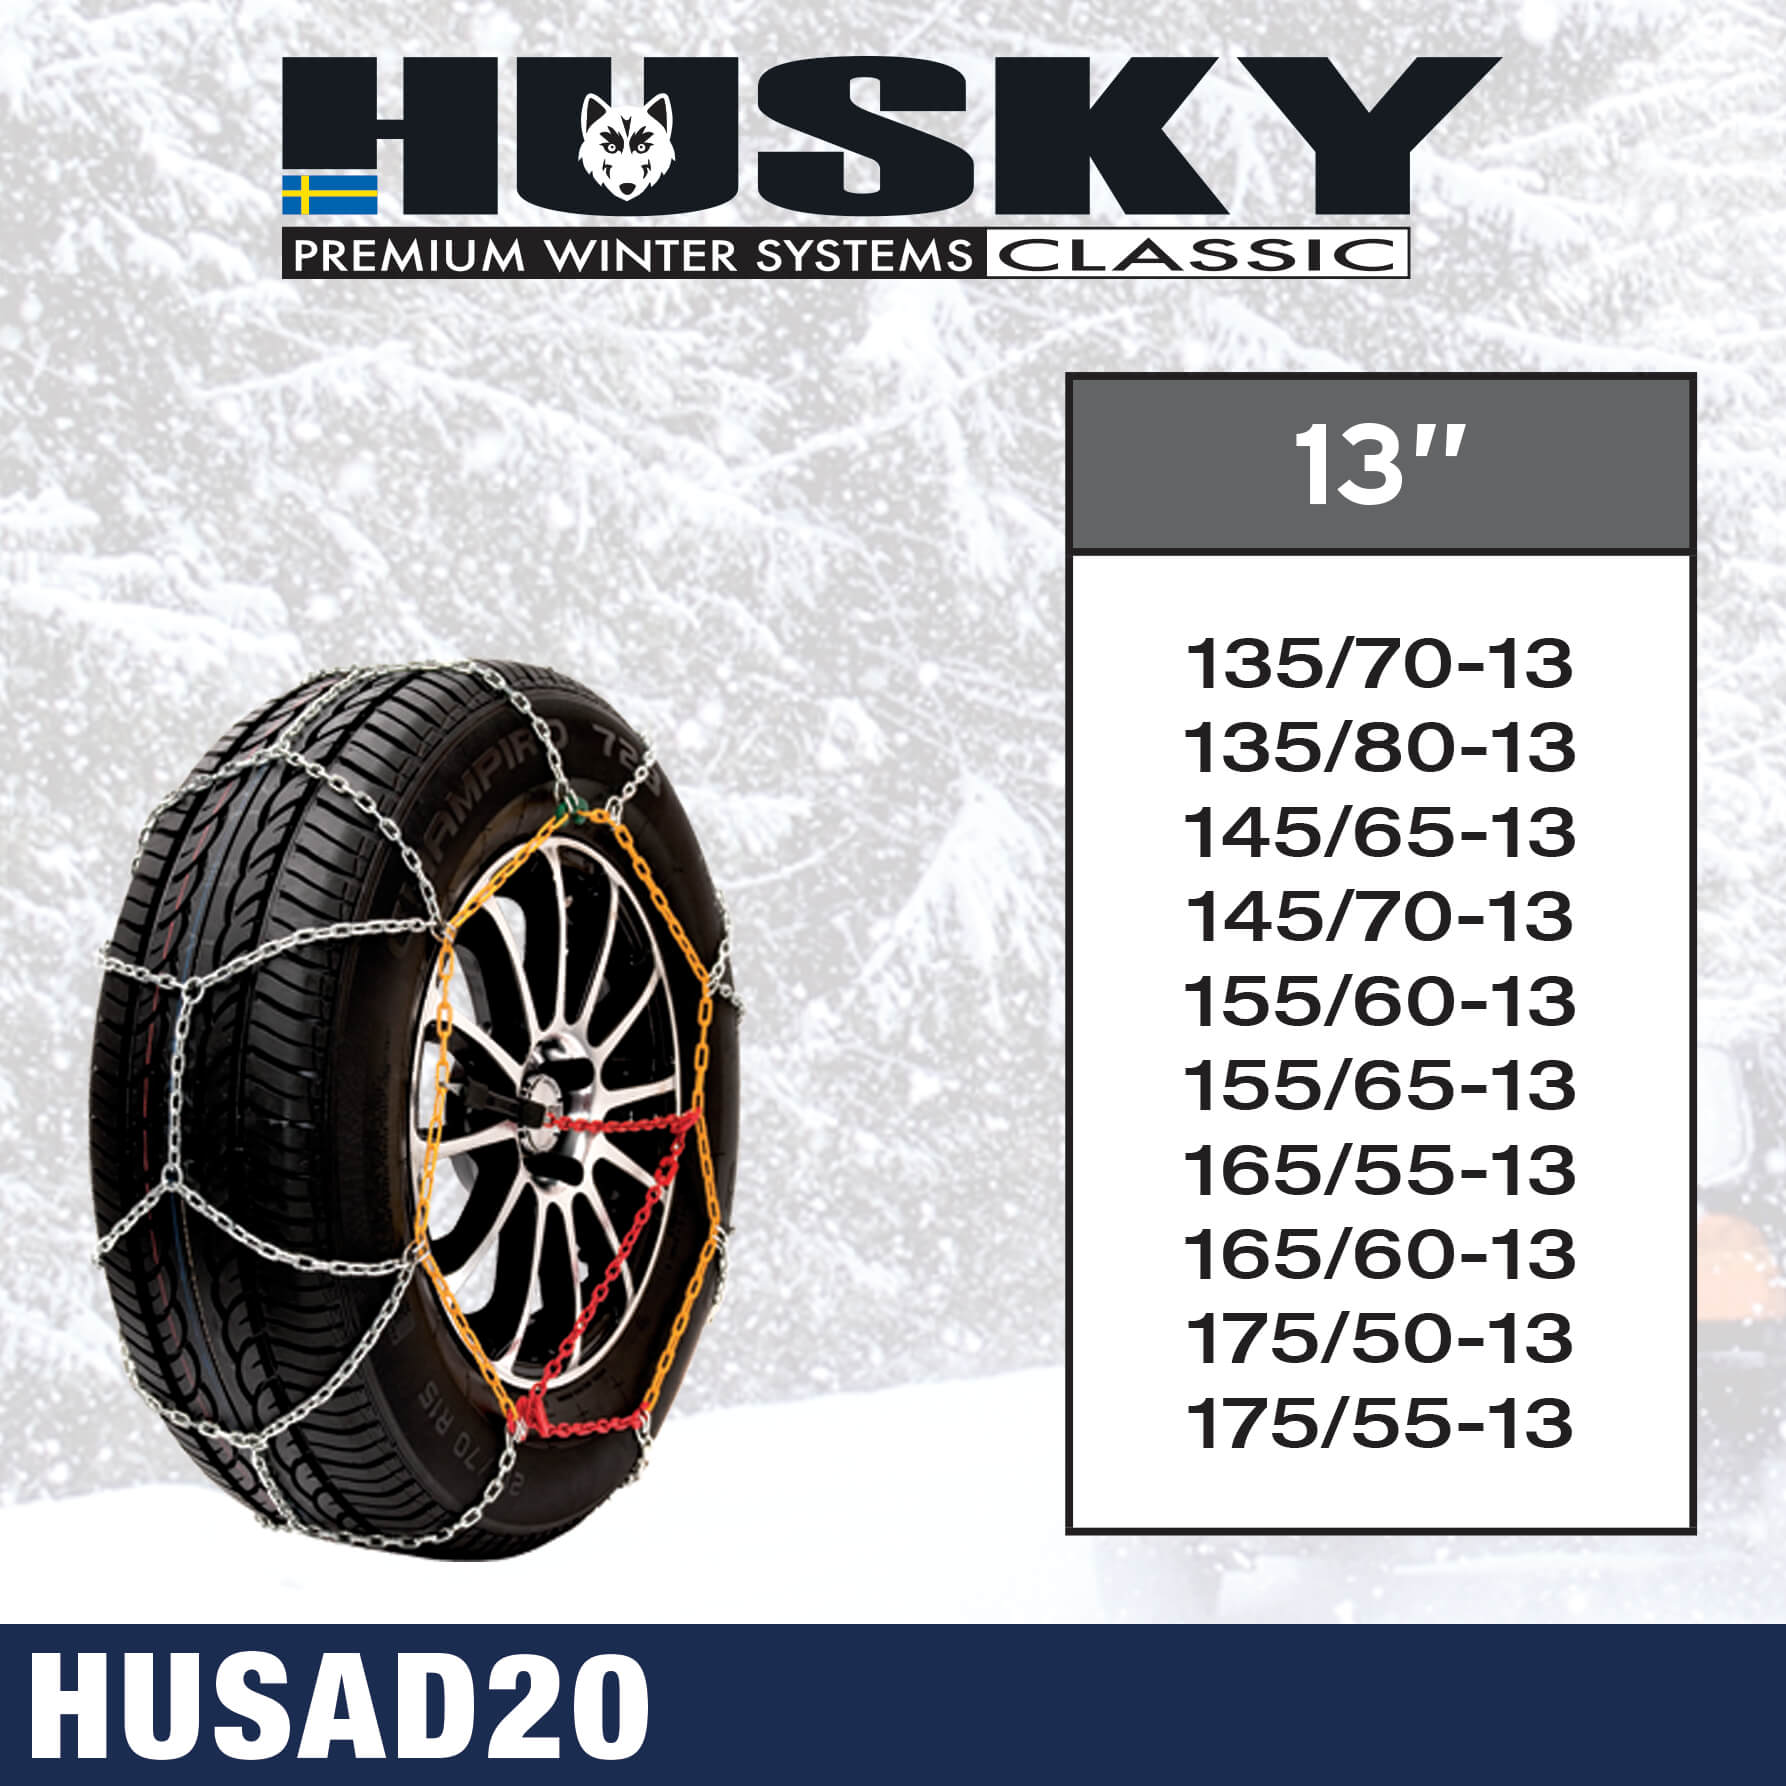 255/40 R18 Sumex Husky Winter Classic Alloy Steel Snow Chains for 18 Car Wheel Tires 